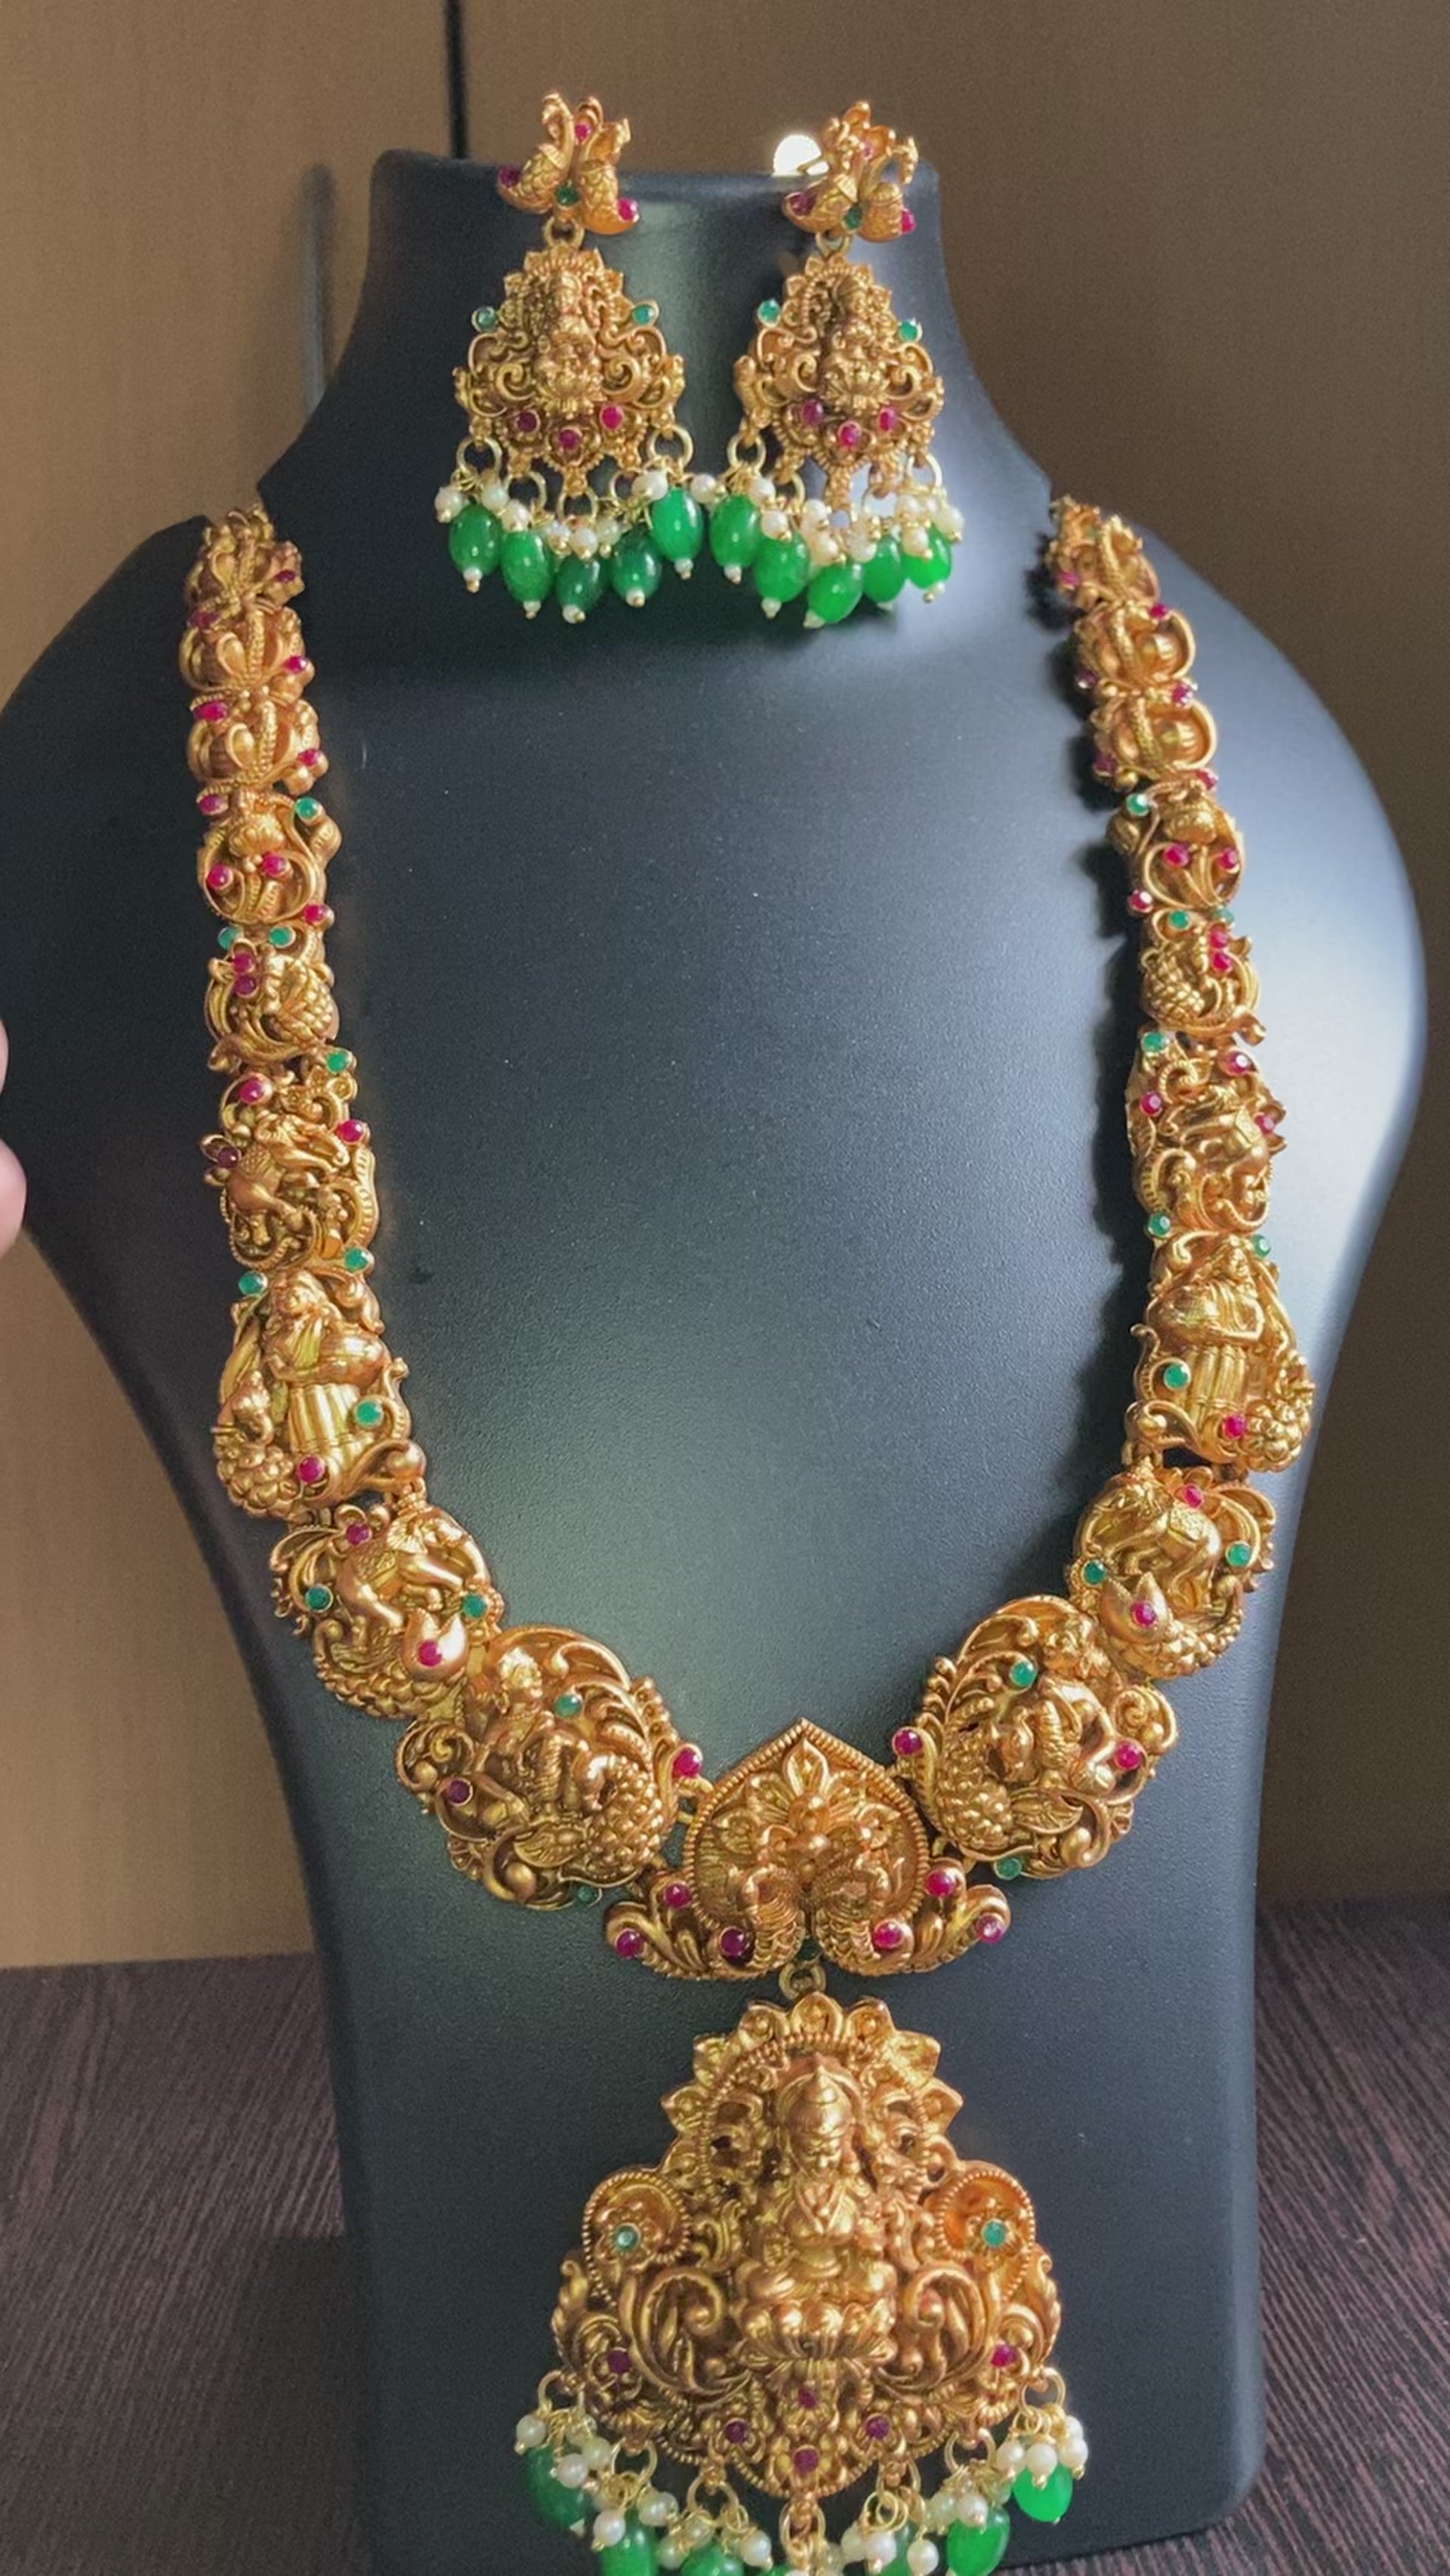 22K, 18K Gold Necklace for Women | Indian Chain Necklaces in CA, GA